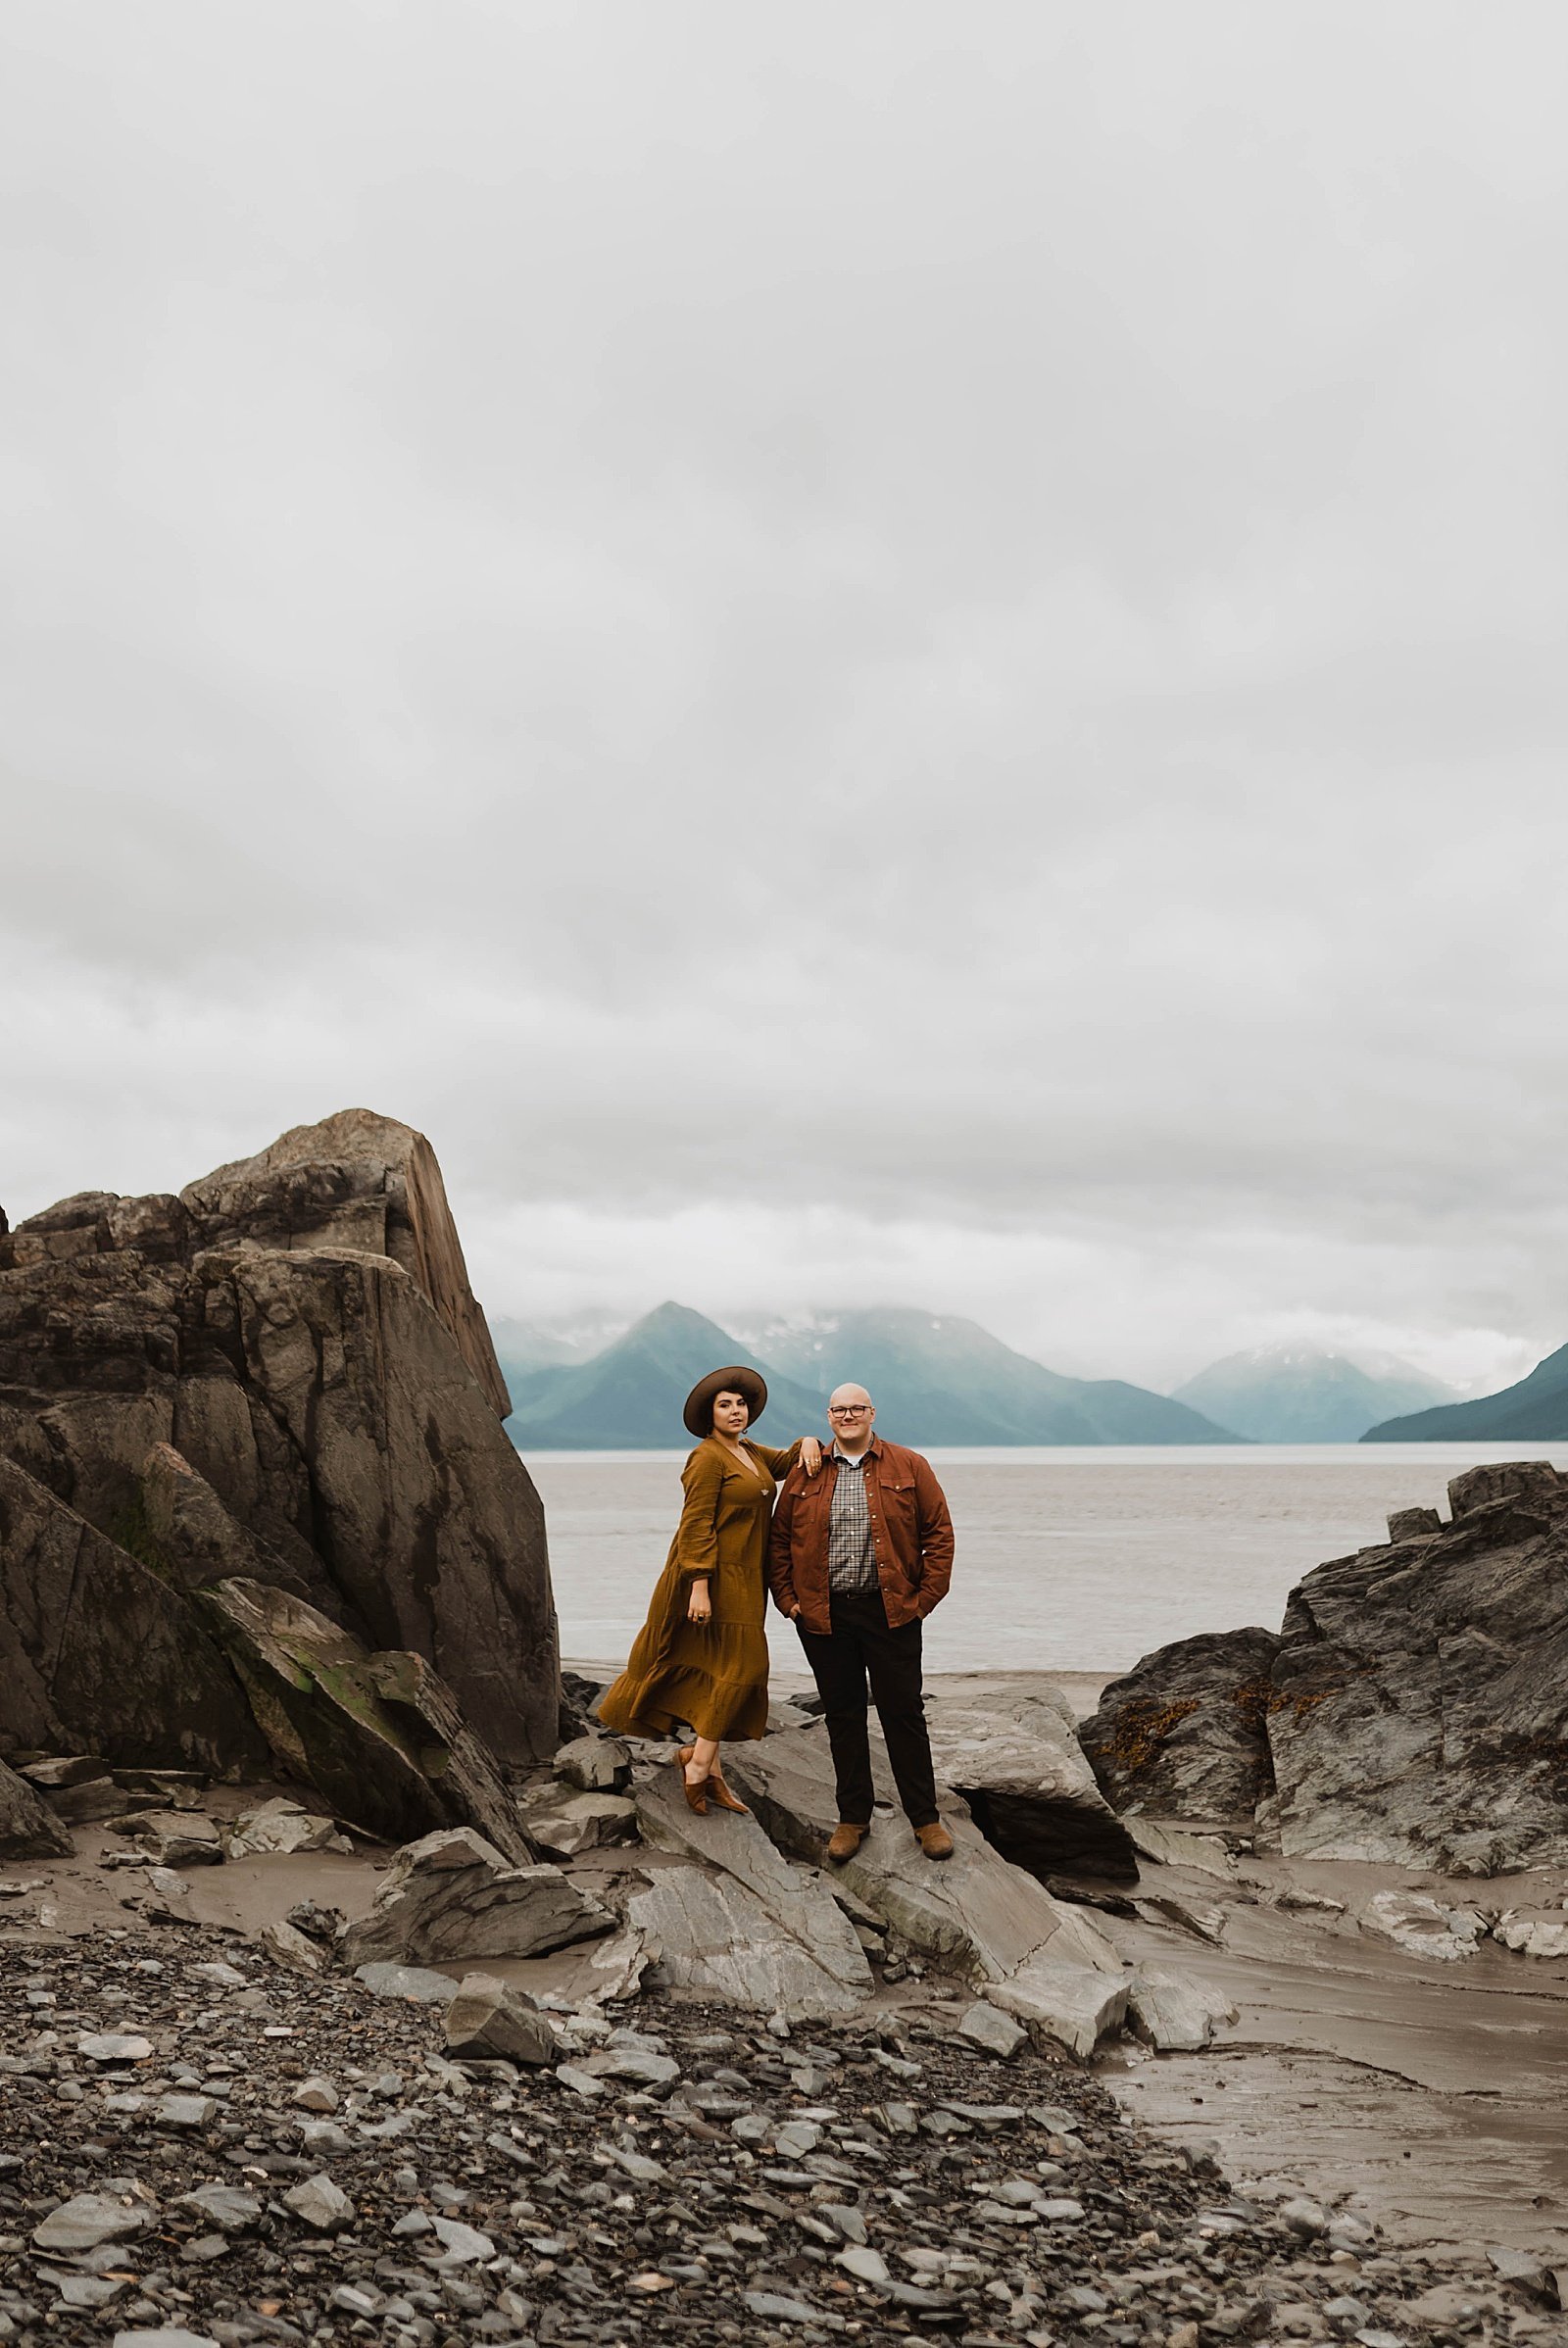  Man and woman in rustic clothing in front of a lake in Alaska for their photo shoot.  